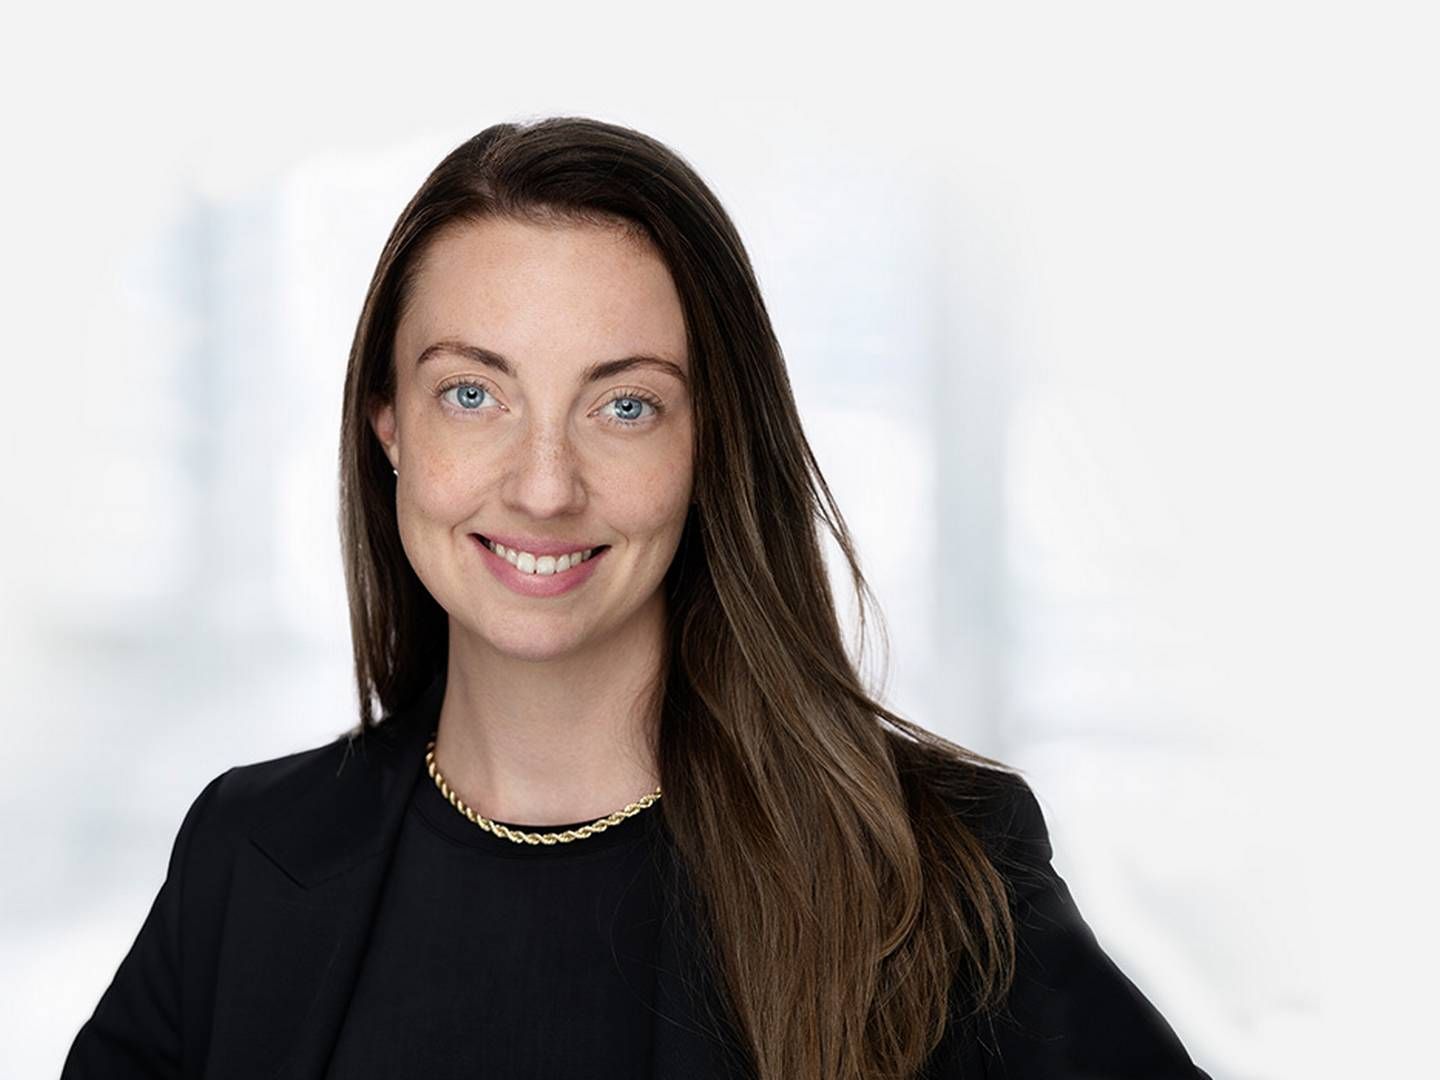 NY SPECIALIST COUNSEL: Anne-Marit Wang Sandvik